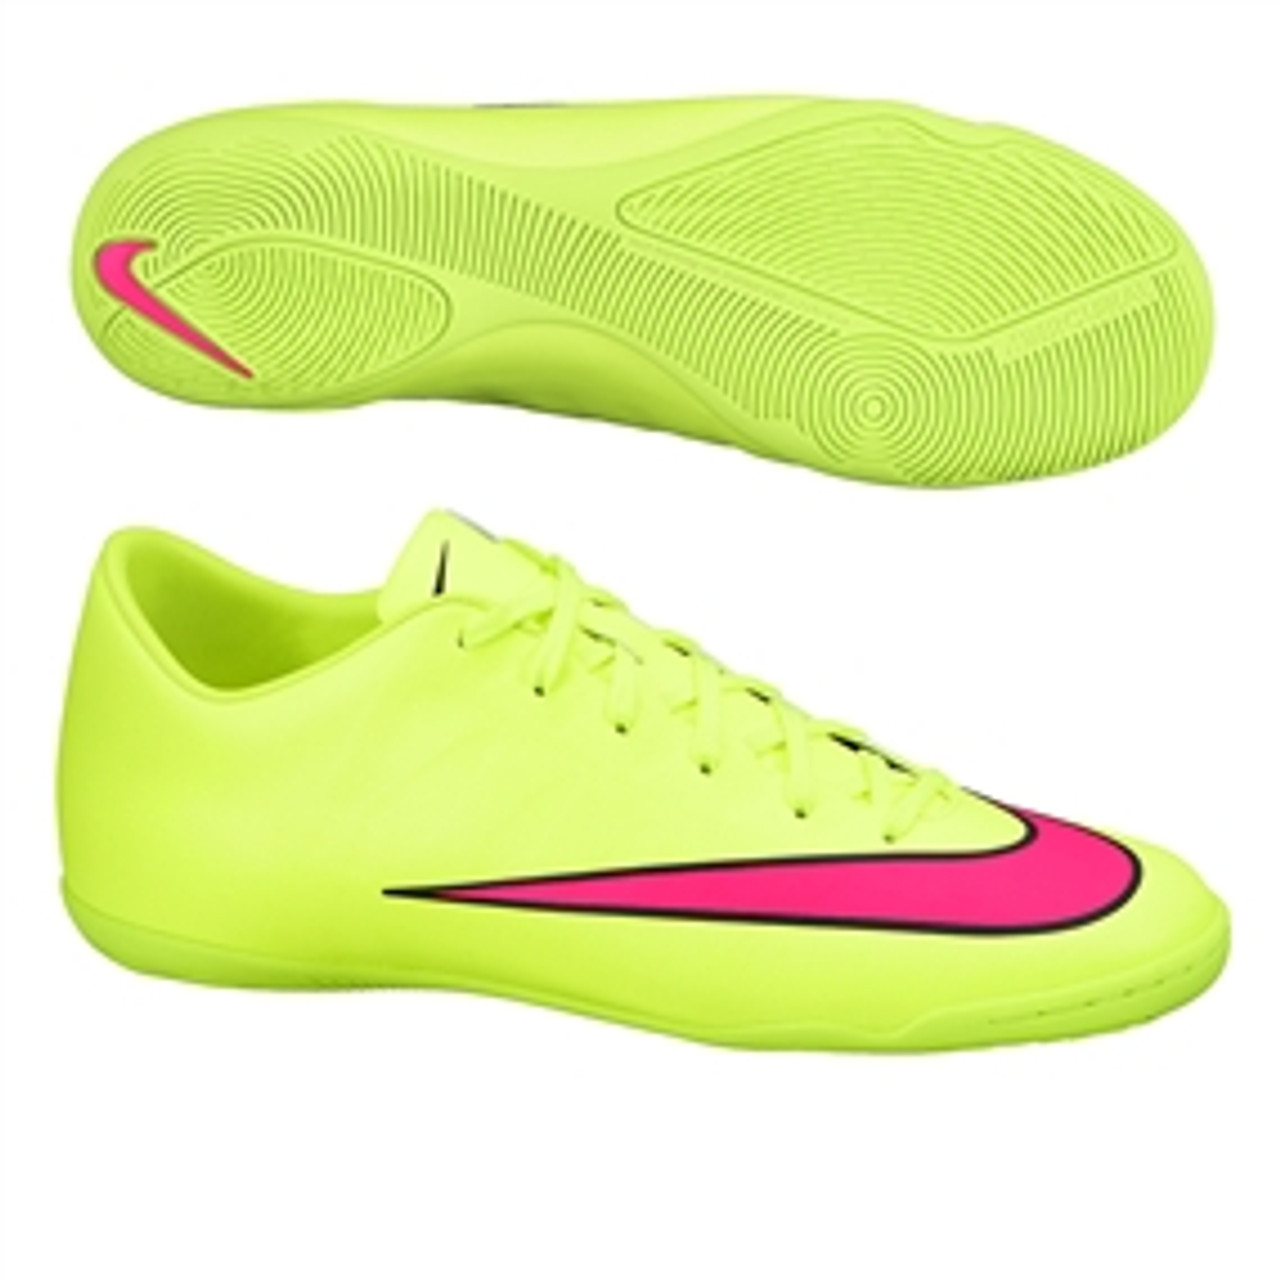 nike mercurial pink and yellow